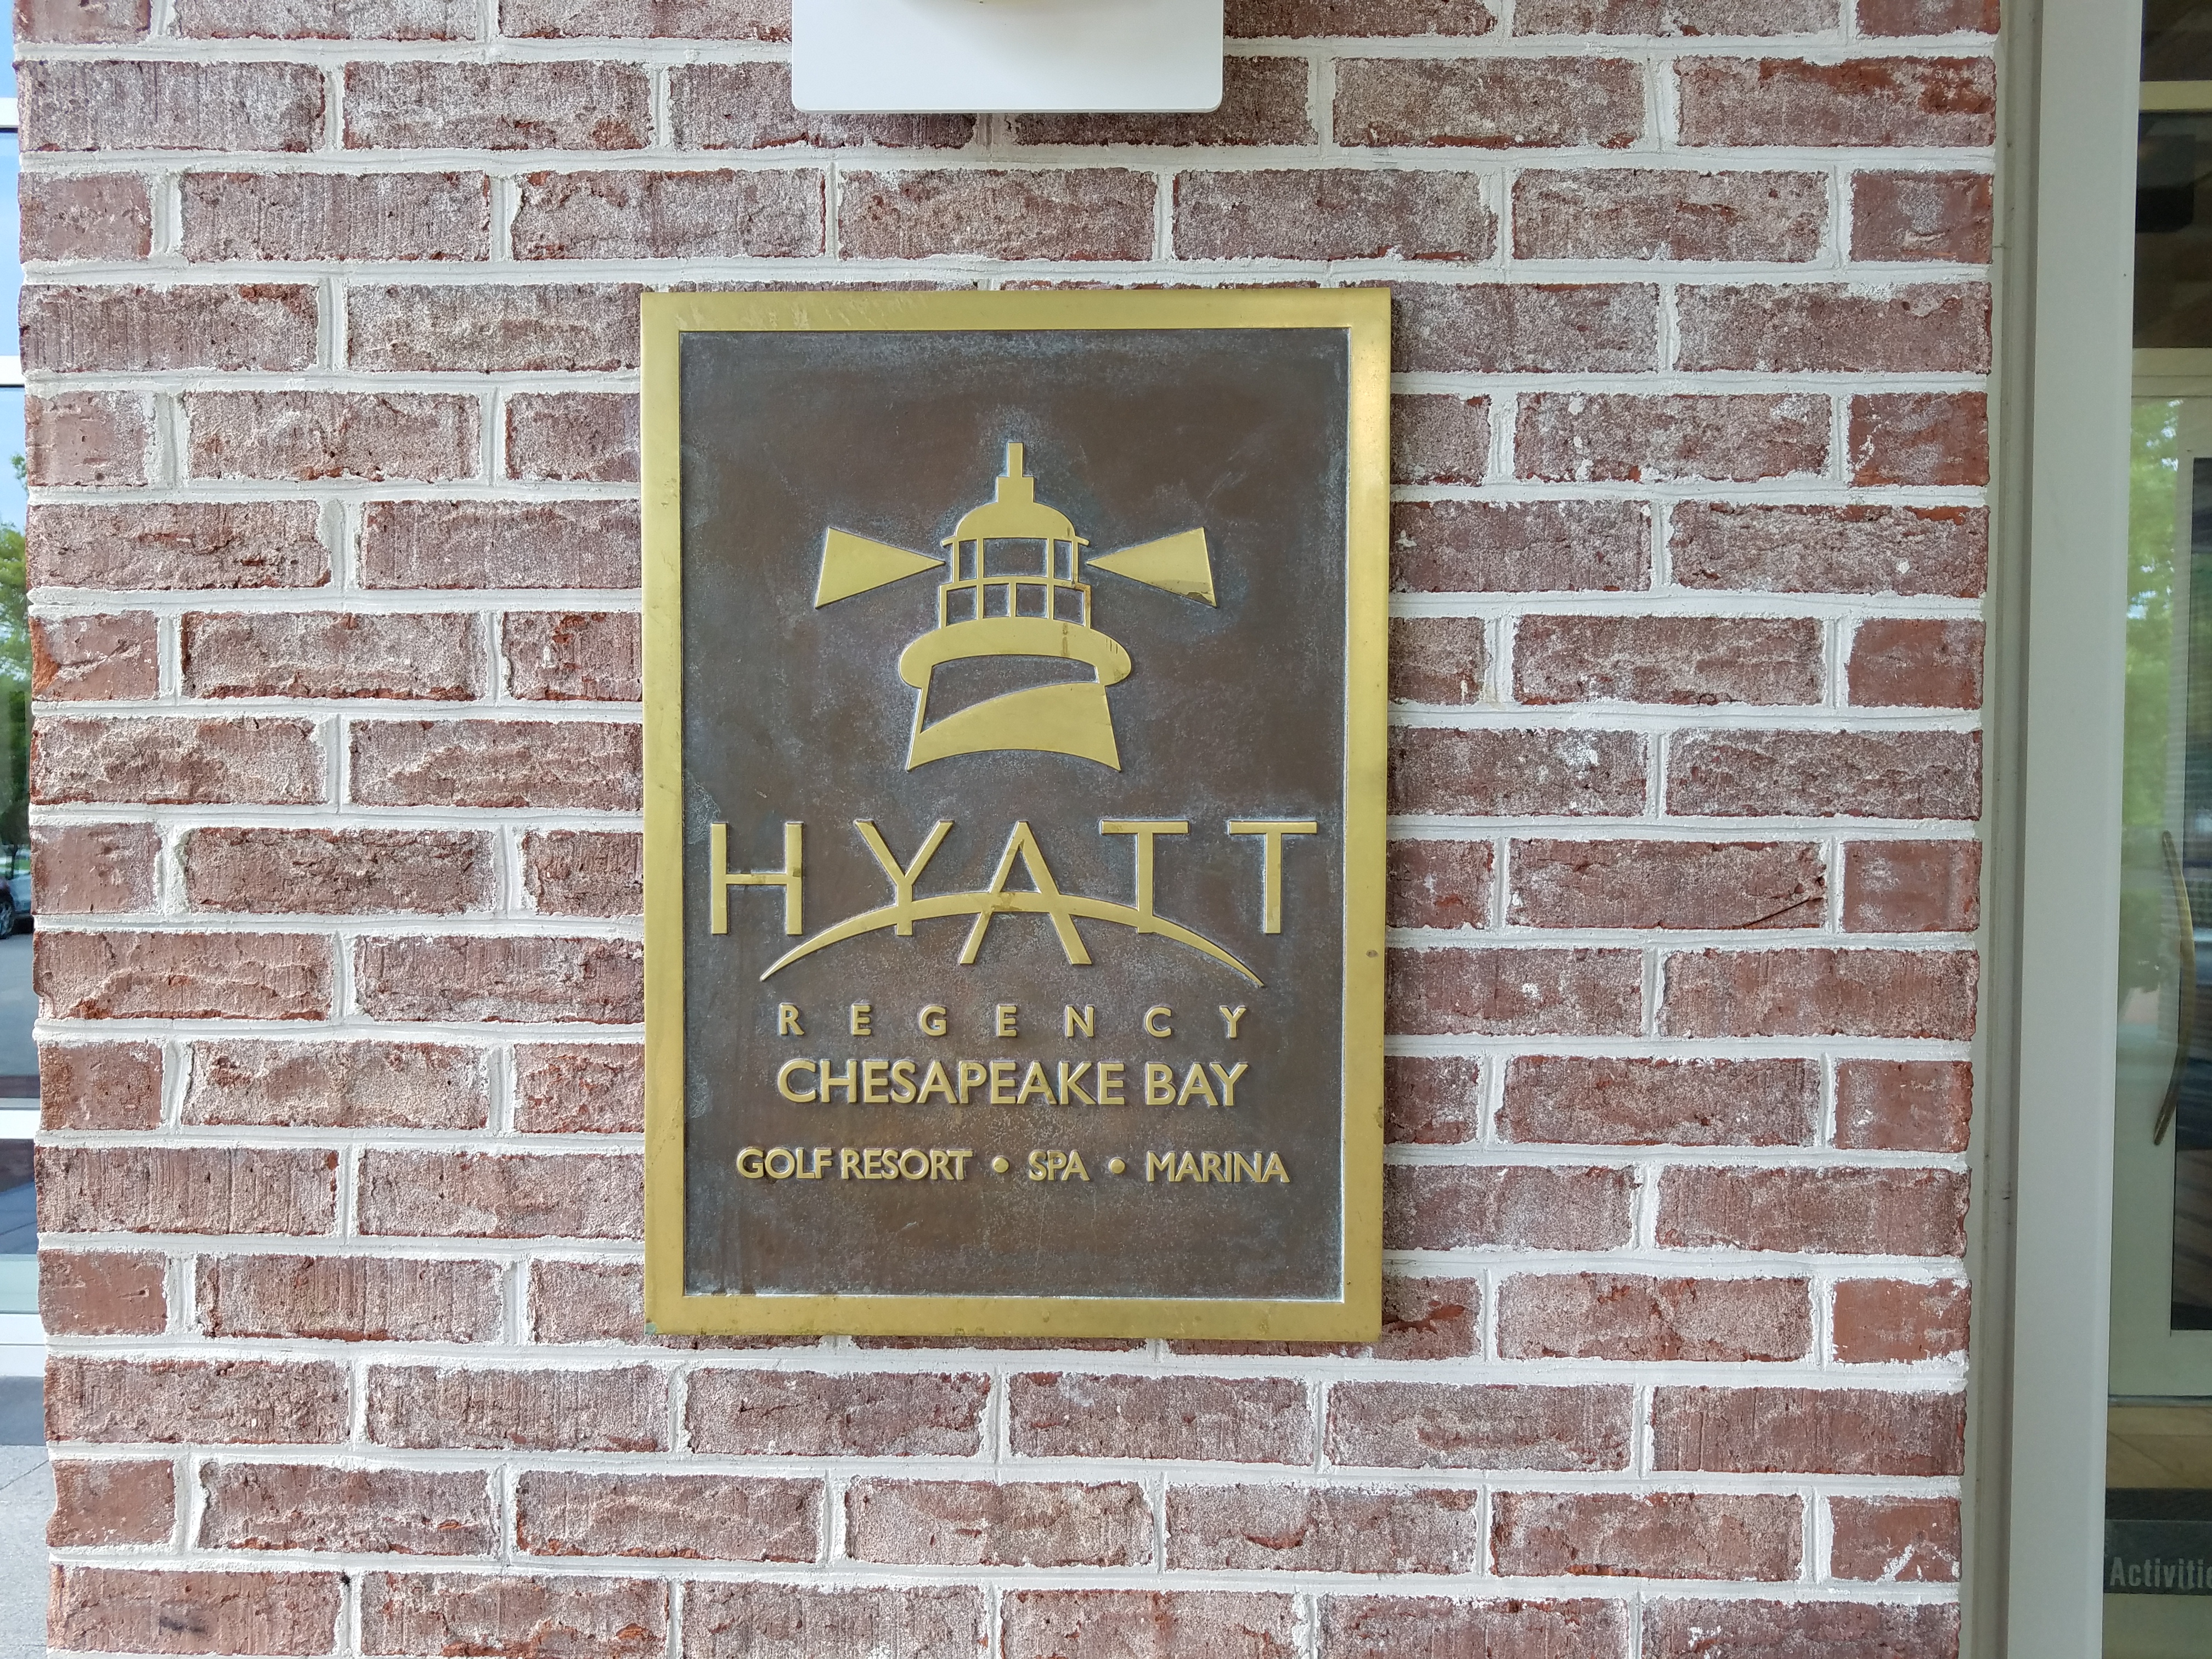 Looking for a beautiful hotel to stay at while visiting Maryland's Eastern Shores? Hyatt Regency Chesapeake Bay has plenty to offer.